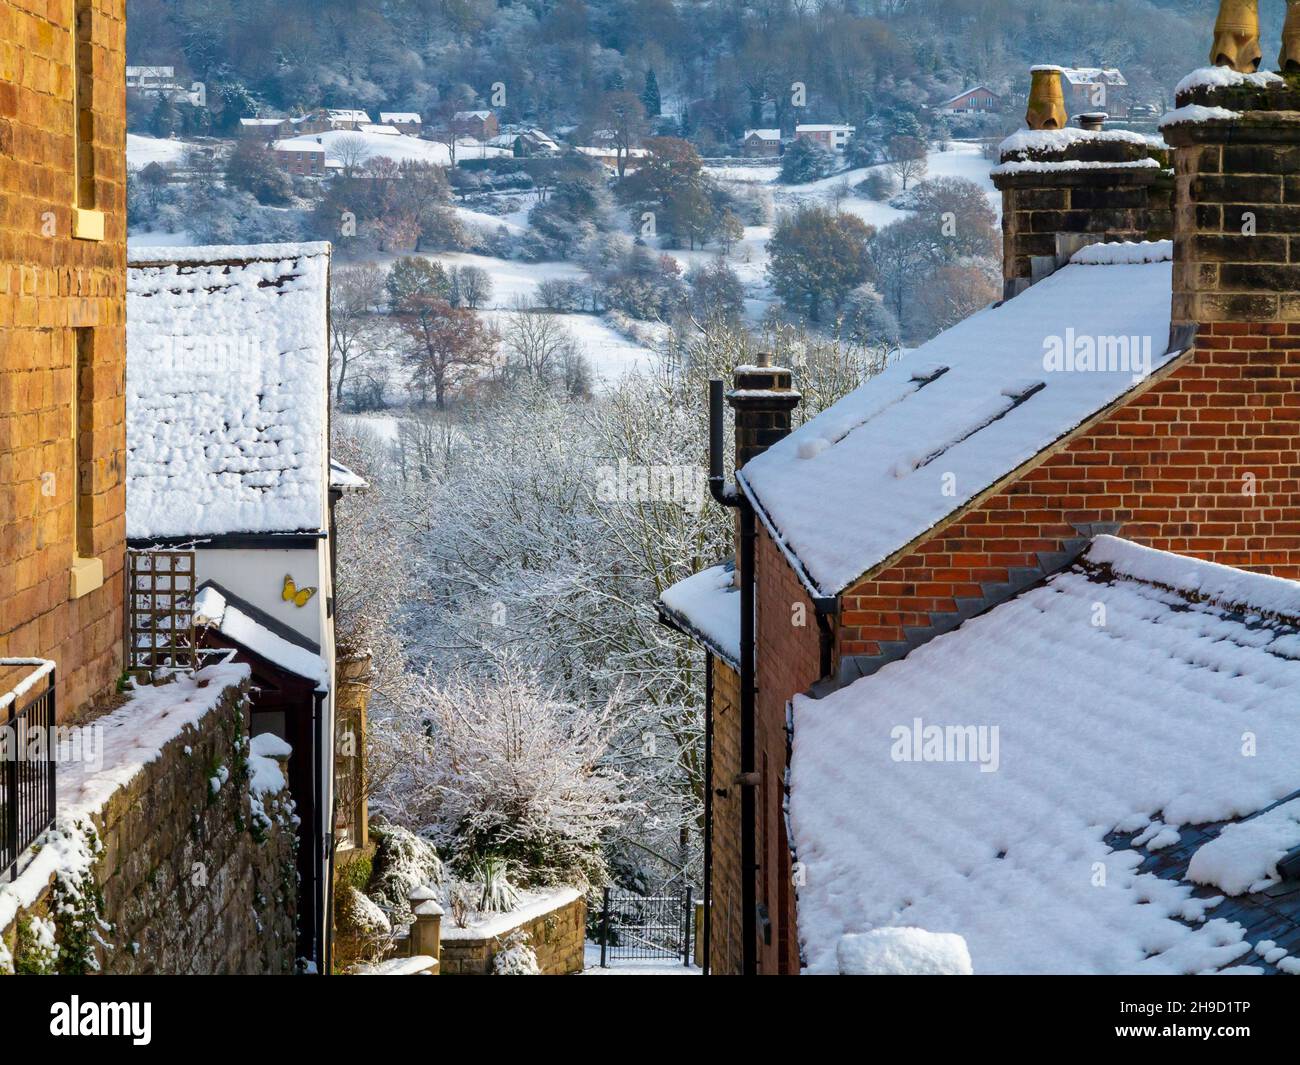 Snow covered landscape with trees at Matlock Bath in the Derbyshire Peak District England UK with houses in the forreground. Stock Photo